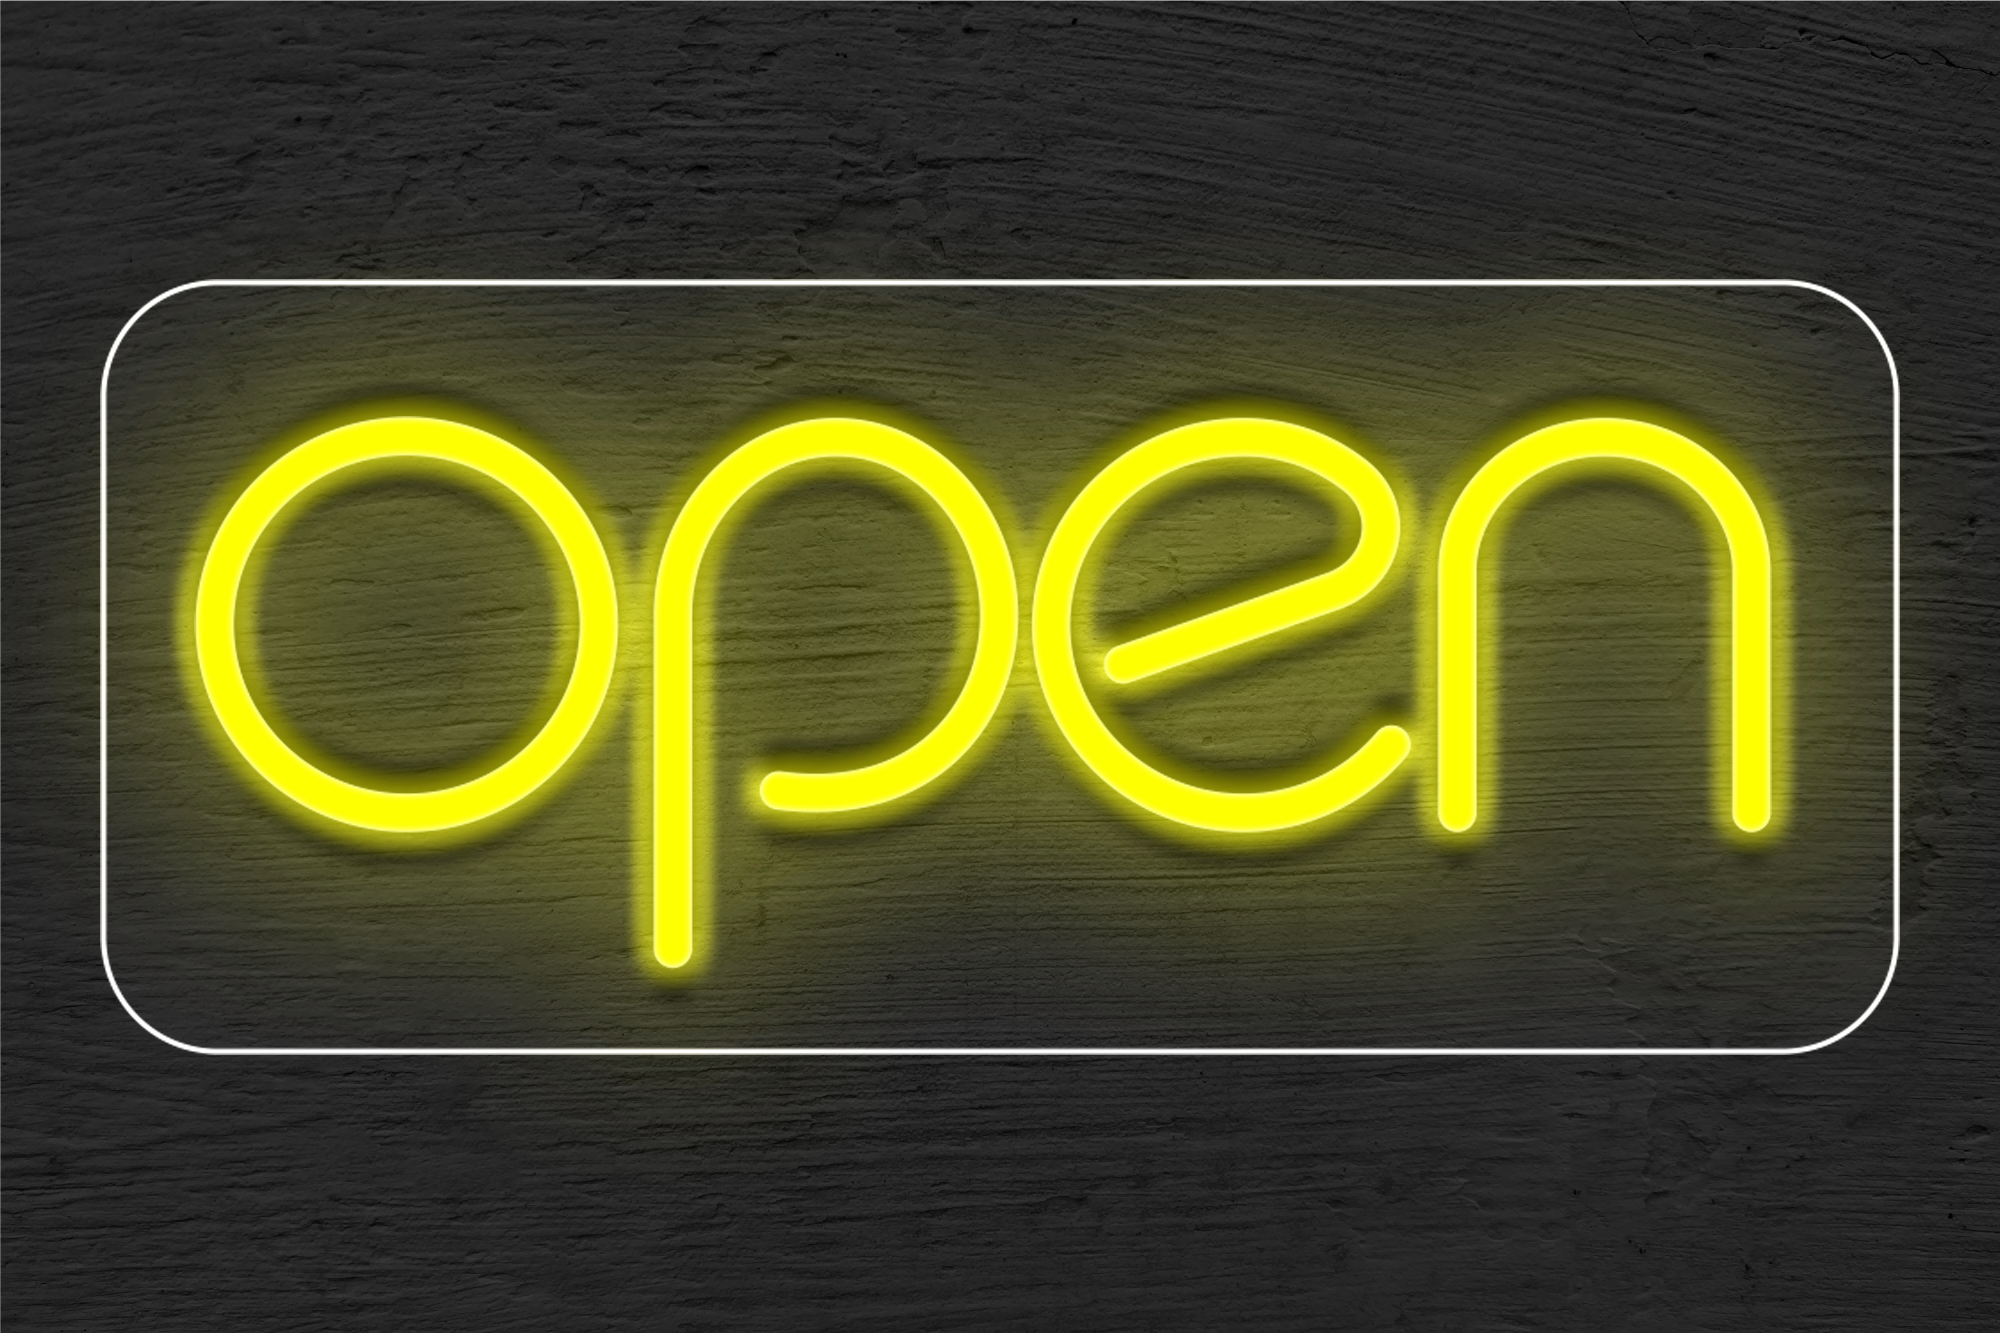 OPEN in All Lower Case LED Neon Sign